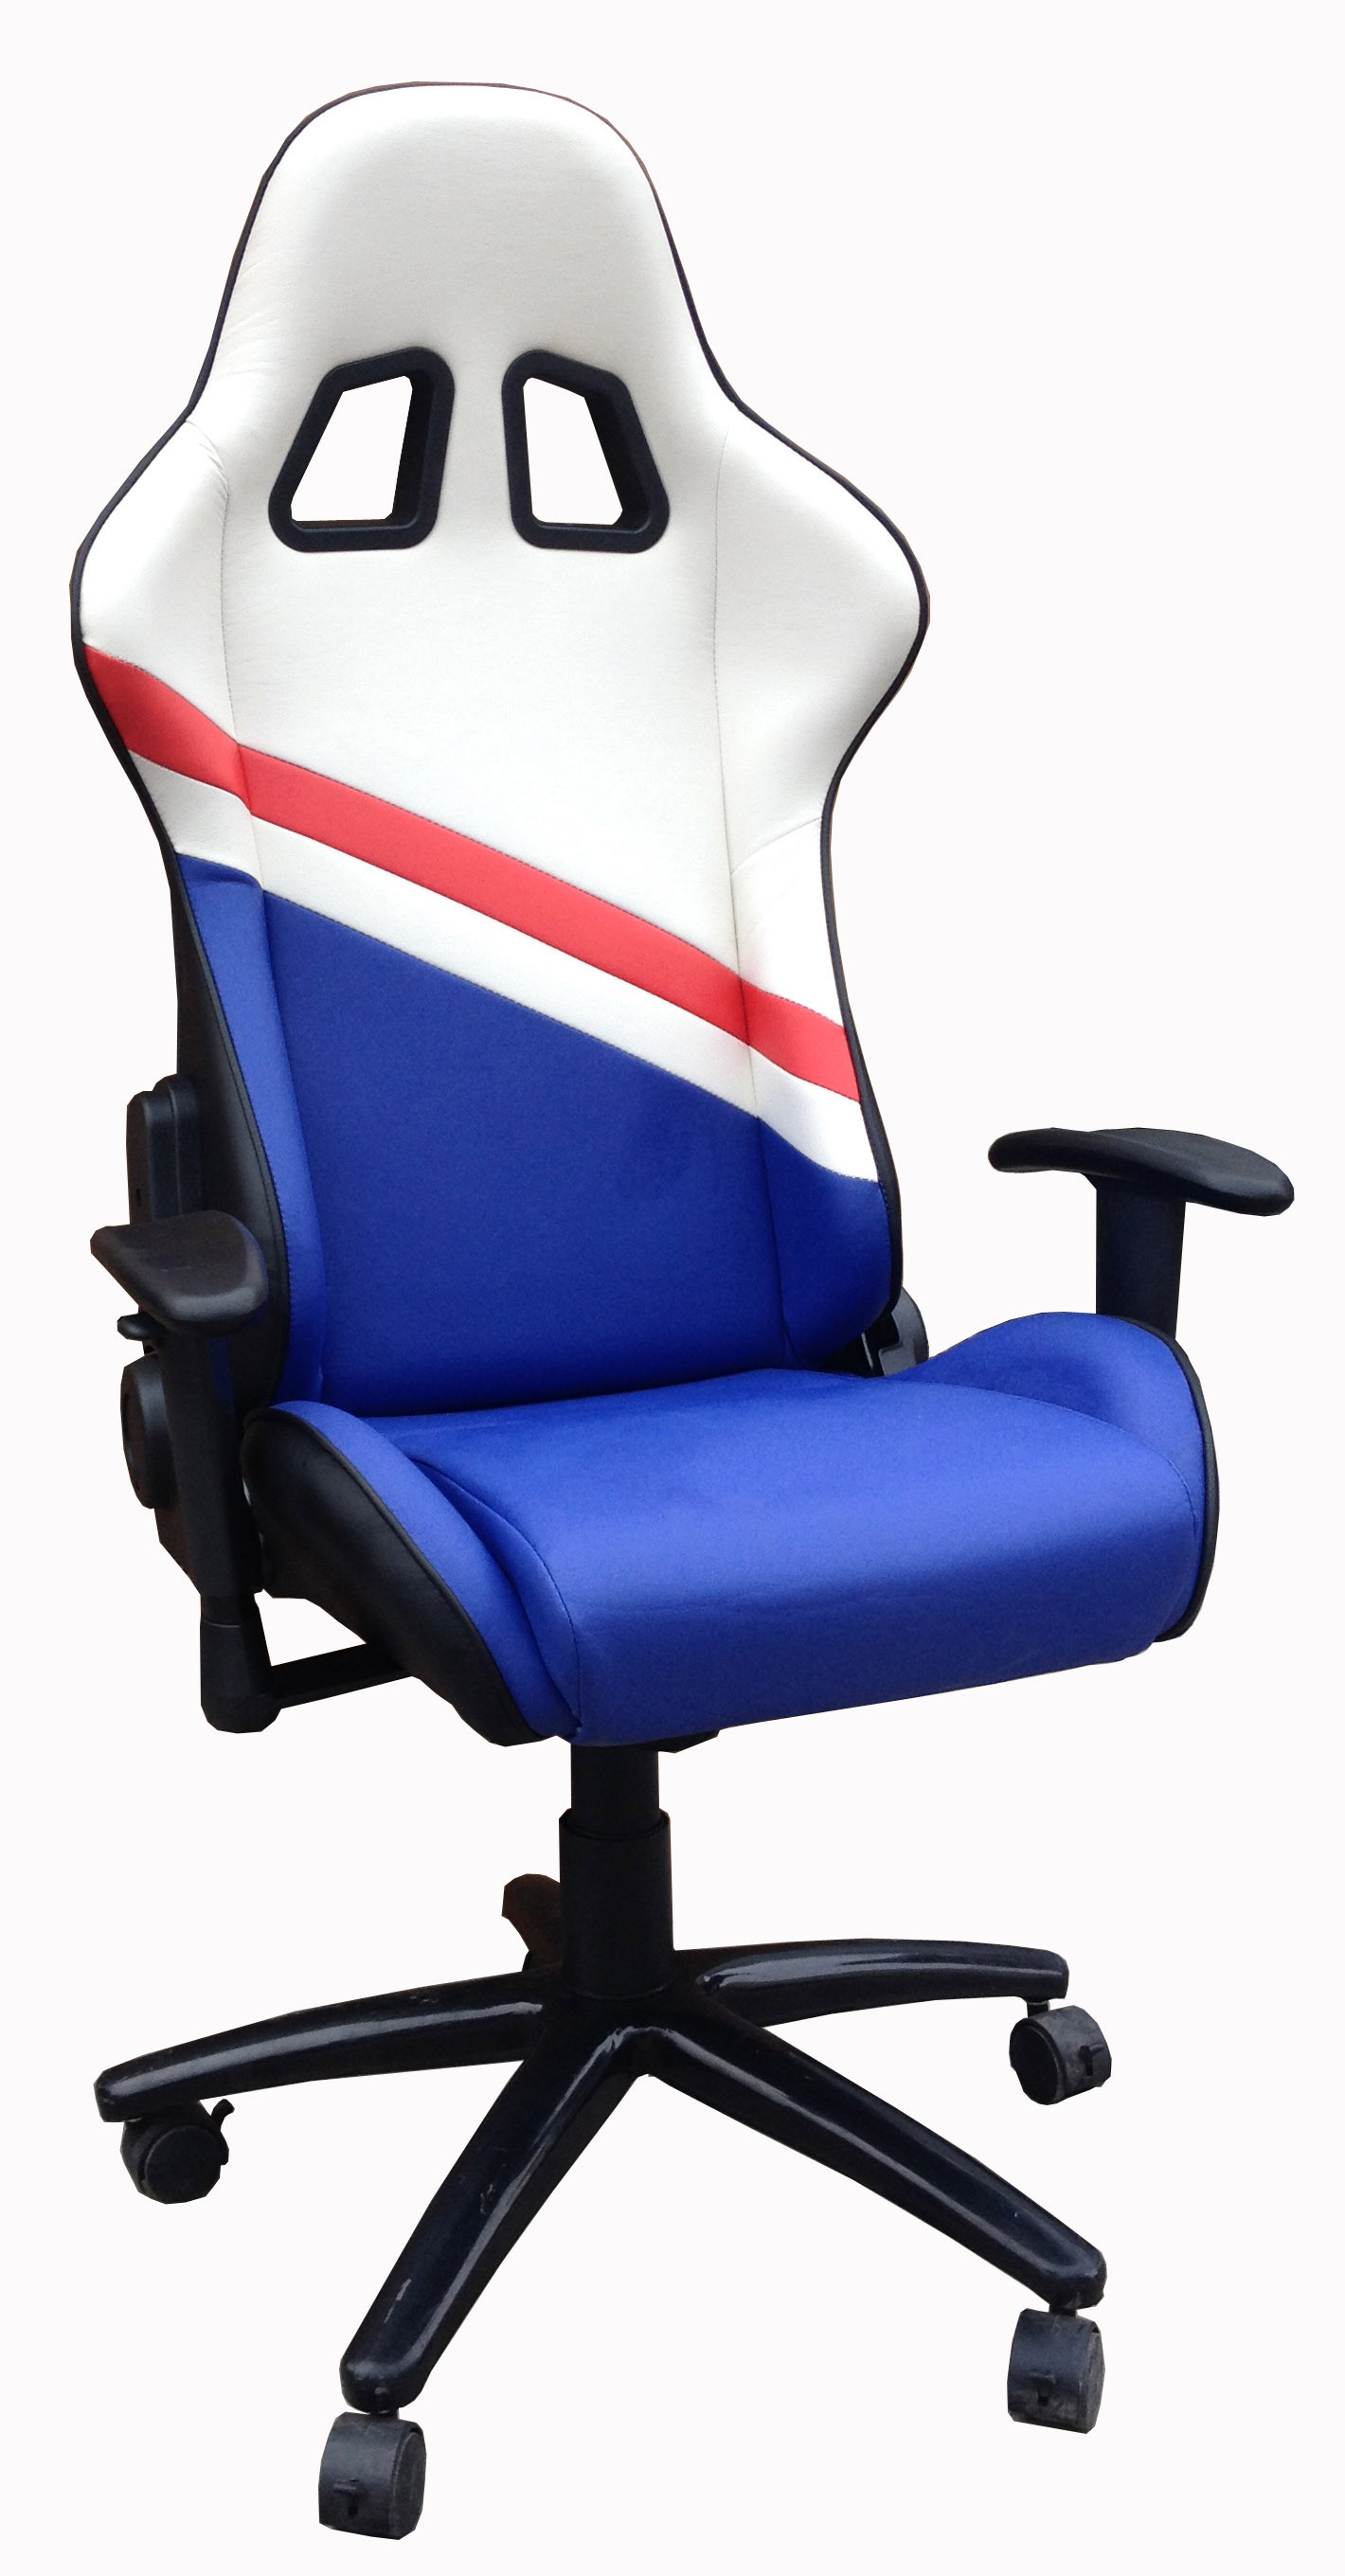 Durable PU Leather Adjustable Office Chair For Work , Study , Rest And Sleep